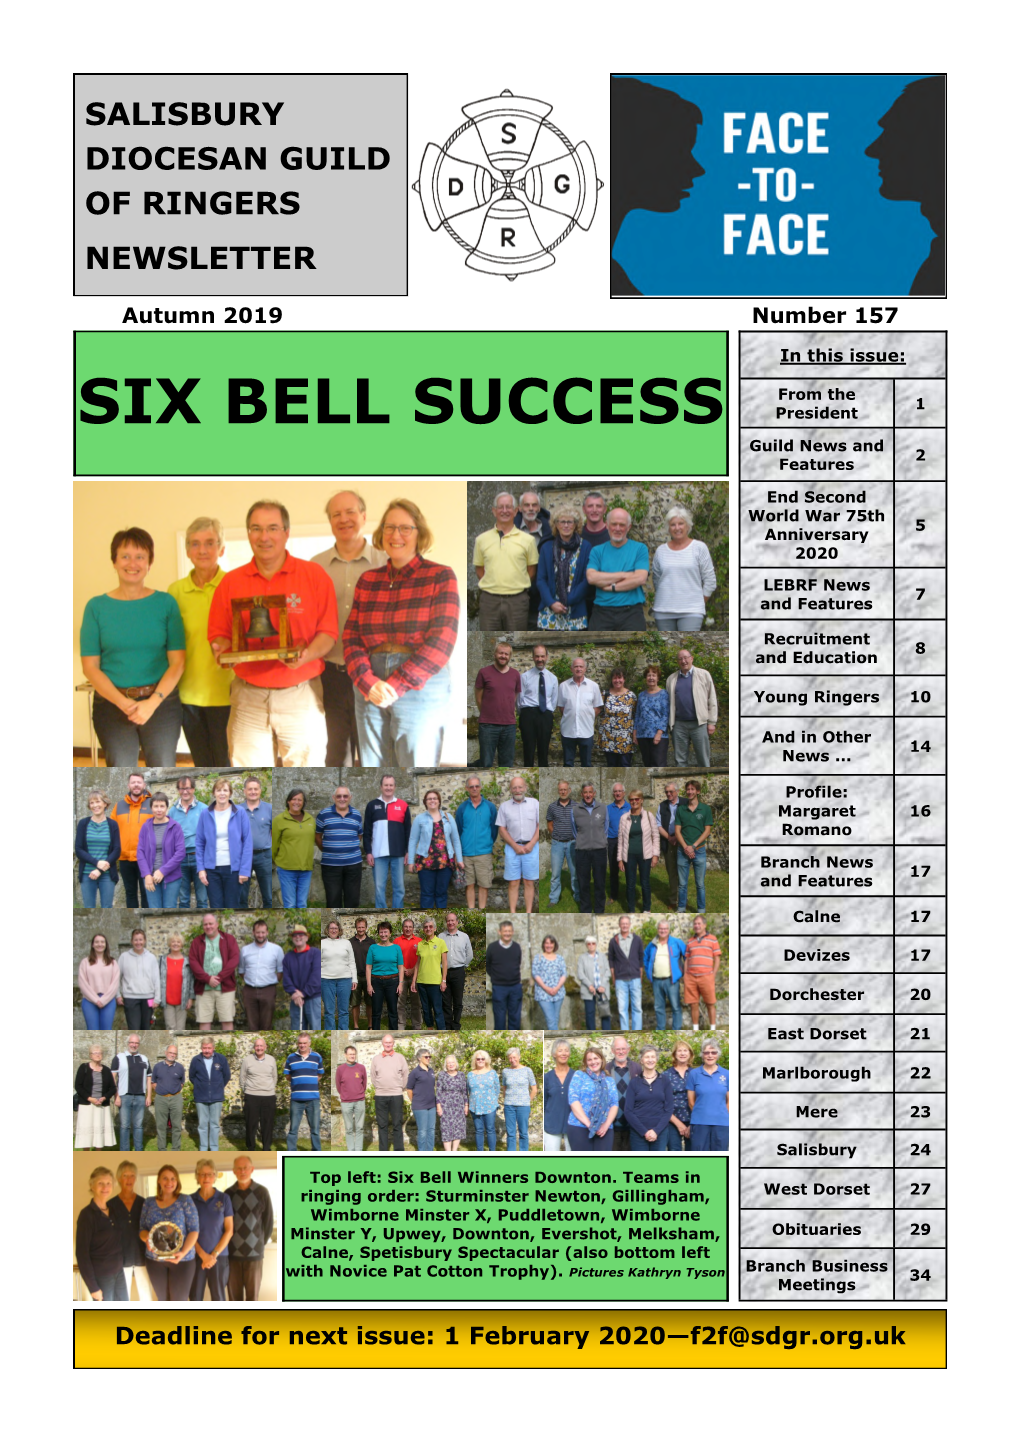 SIX BELL SUCCESS President Guild News and 2 Features